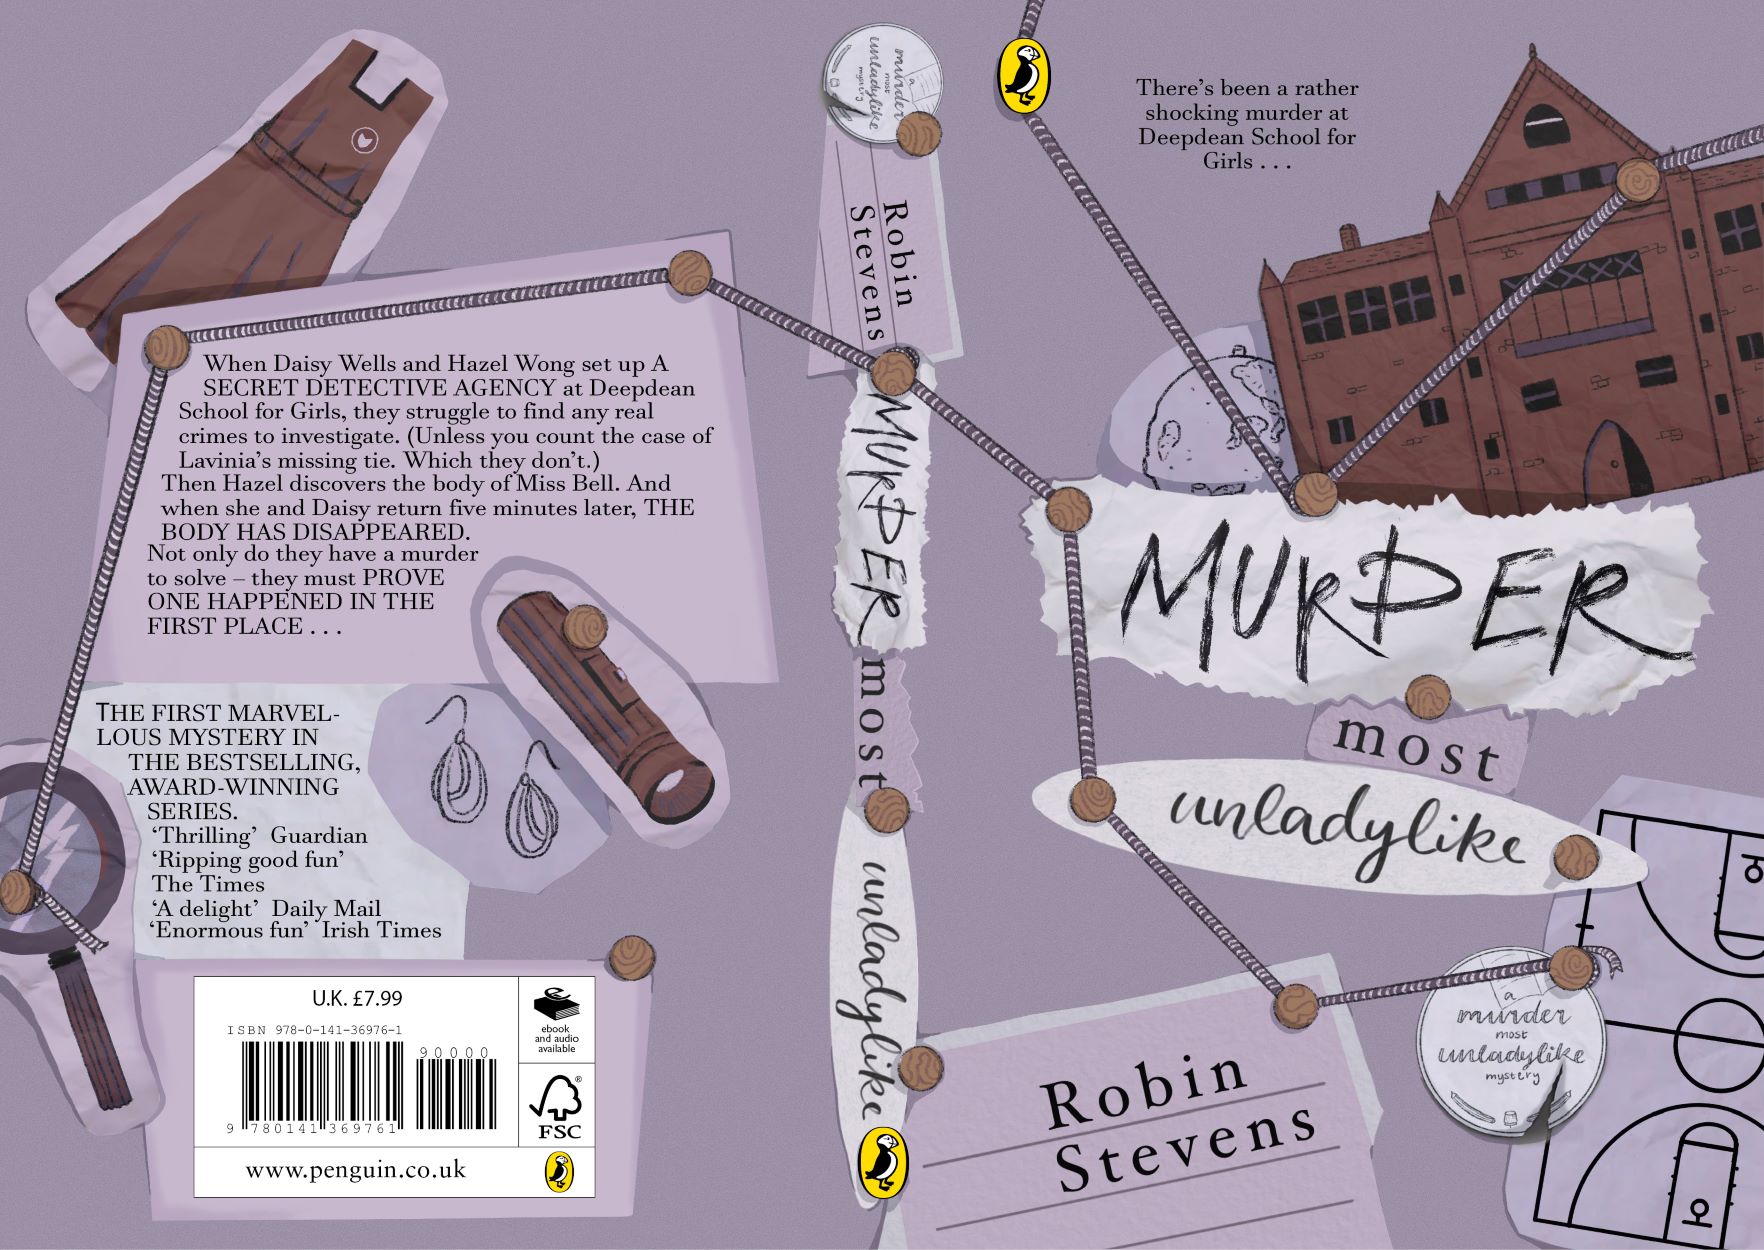 BA Illustration work by Sofia Ali showing a children's book cover in the form of an investigation board with a majority purple colour scheme, for the novel Murder Most Unladylike.